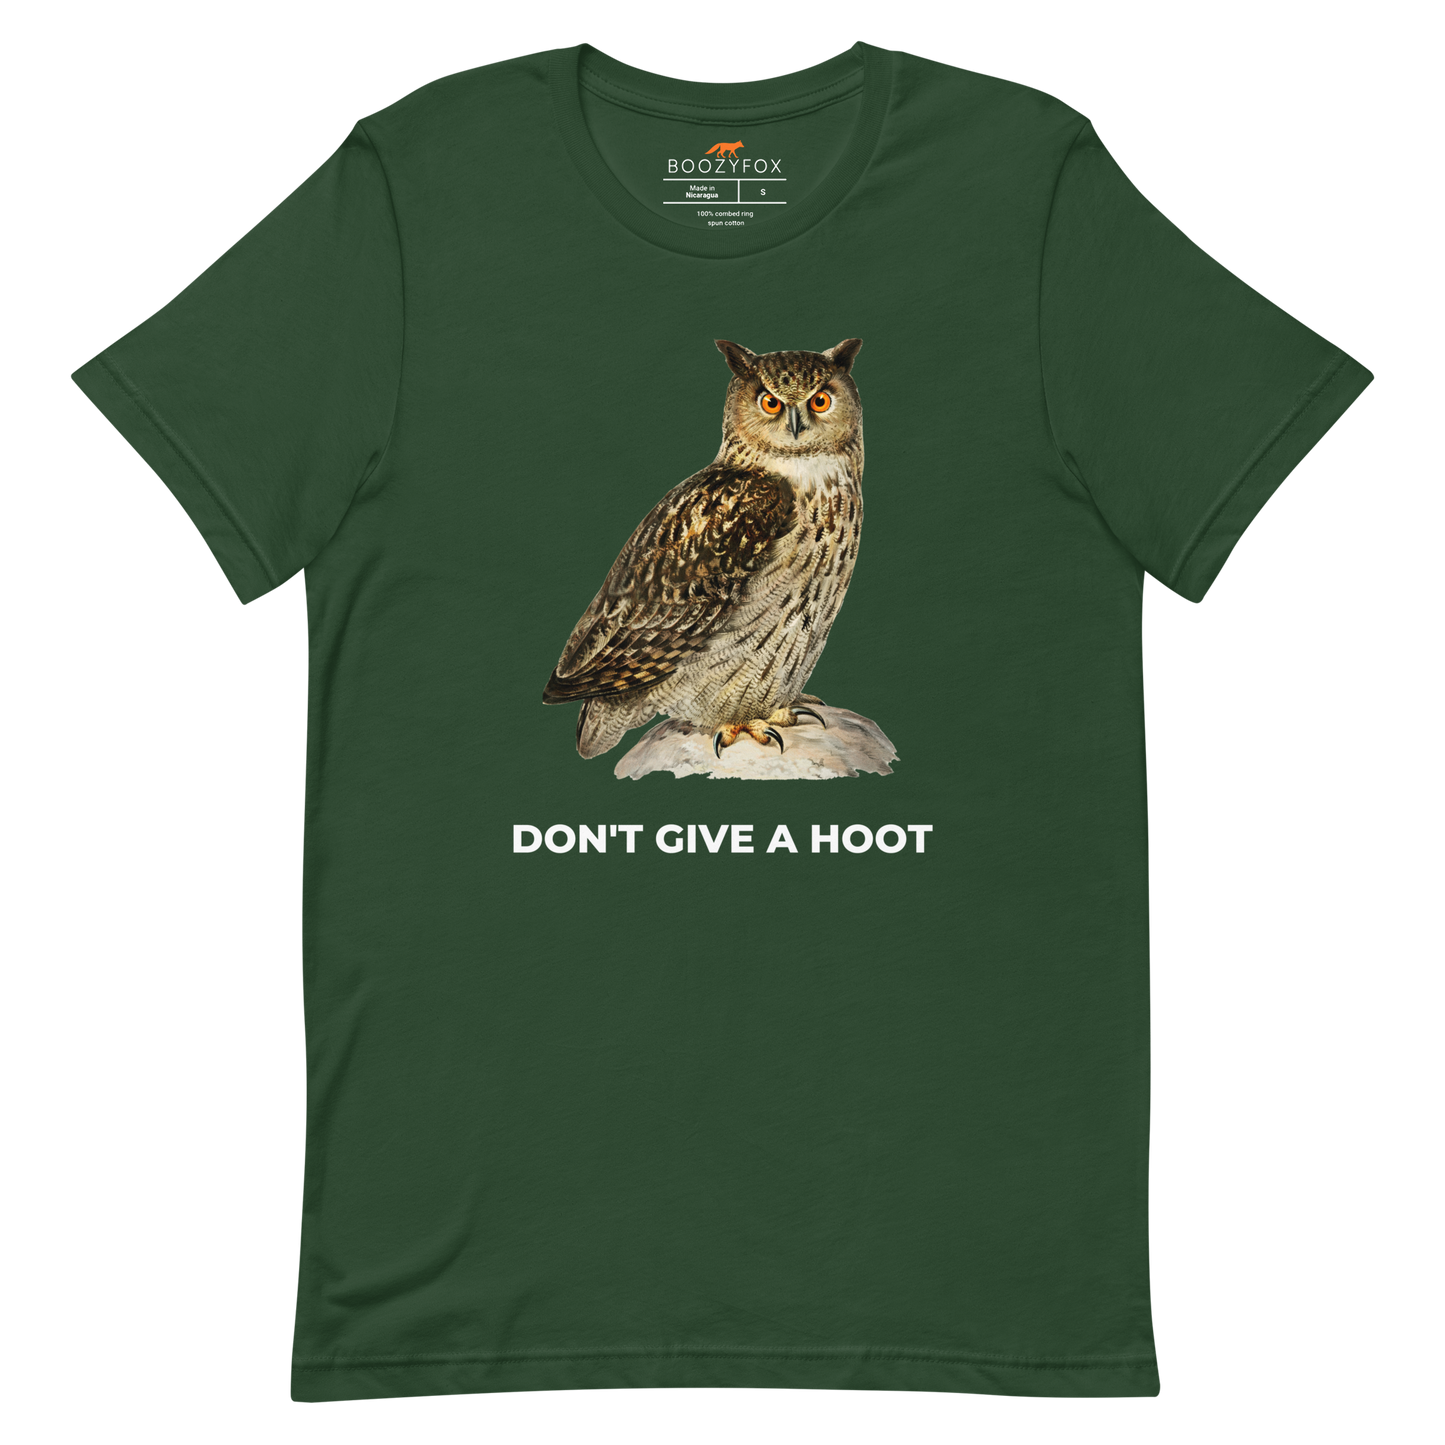 Forest Green Premium Owl T-Shirt featuring a captivating Don't Give A Hoot graphic on the chest - Funny Graphic Owl Tees - Boozy Fox